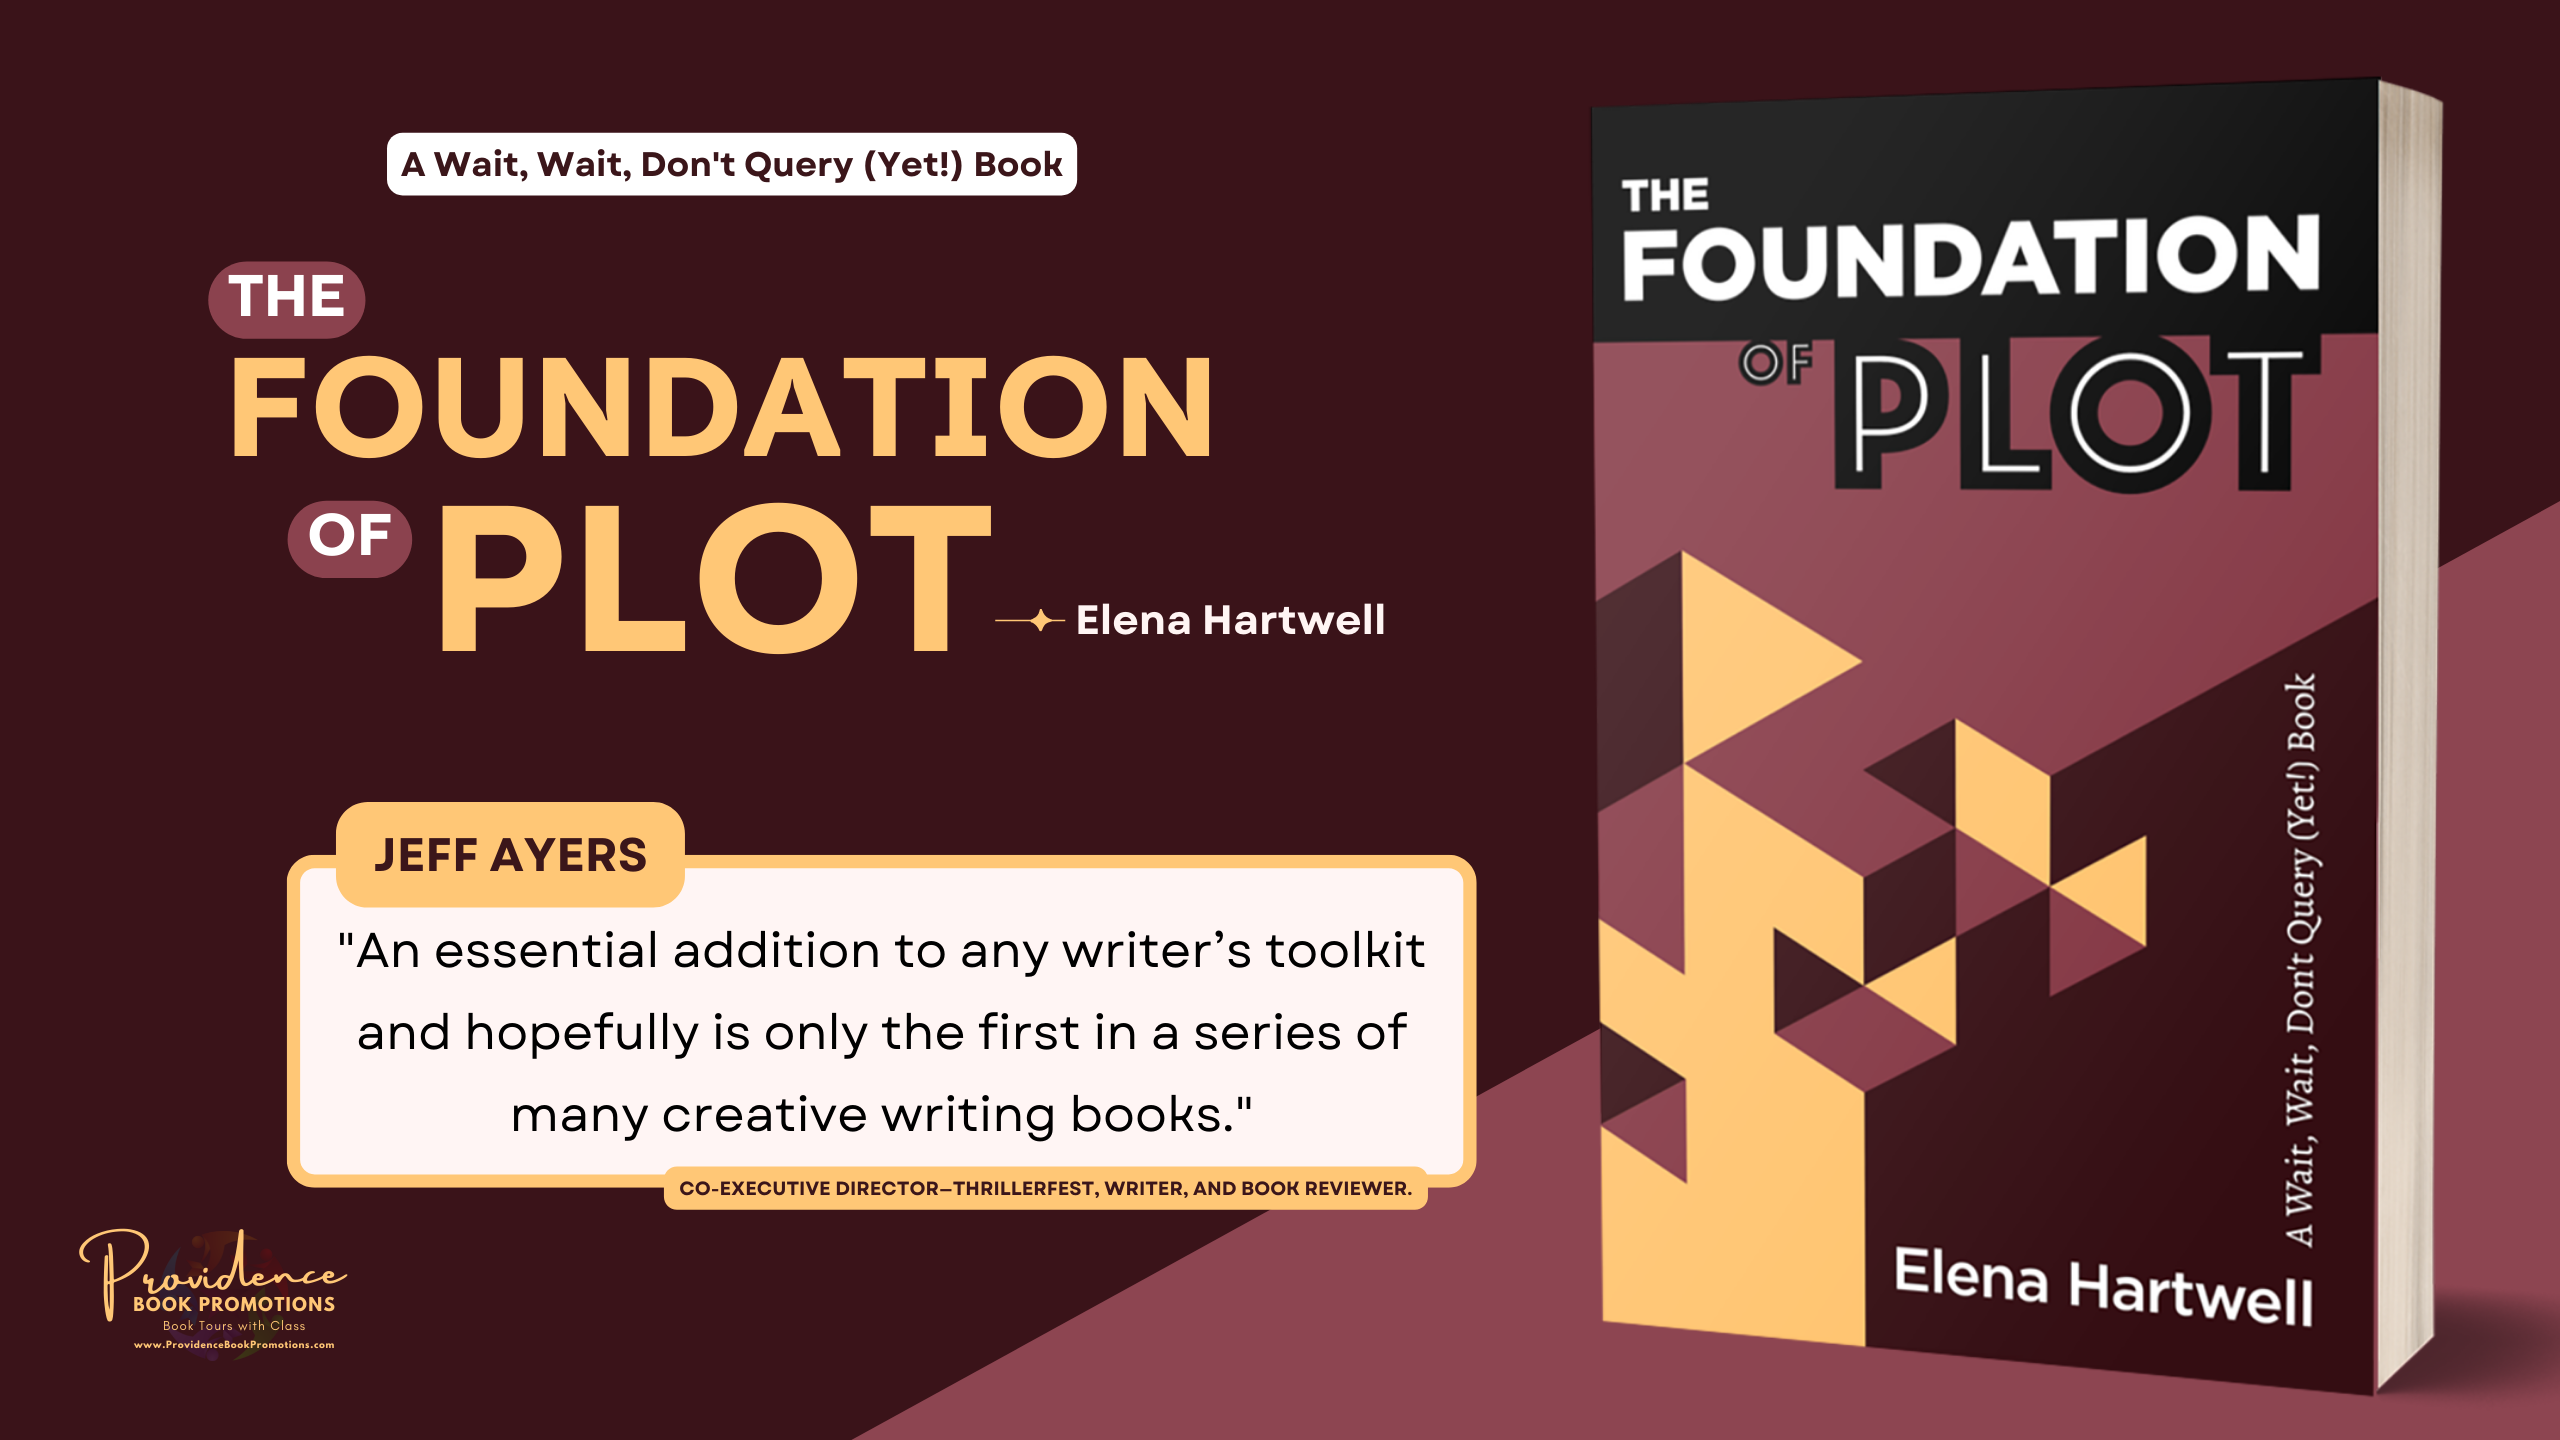 The Foundation of Plot by Elena Hartwell